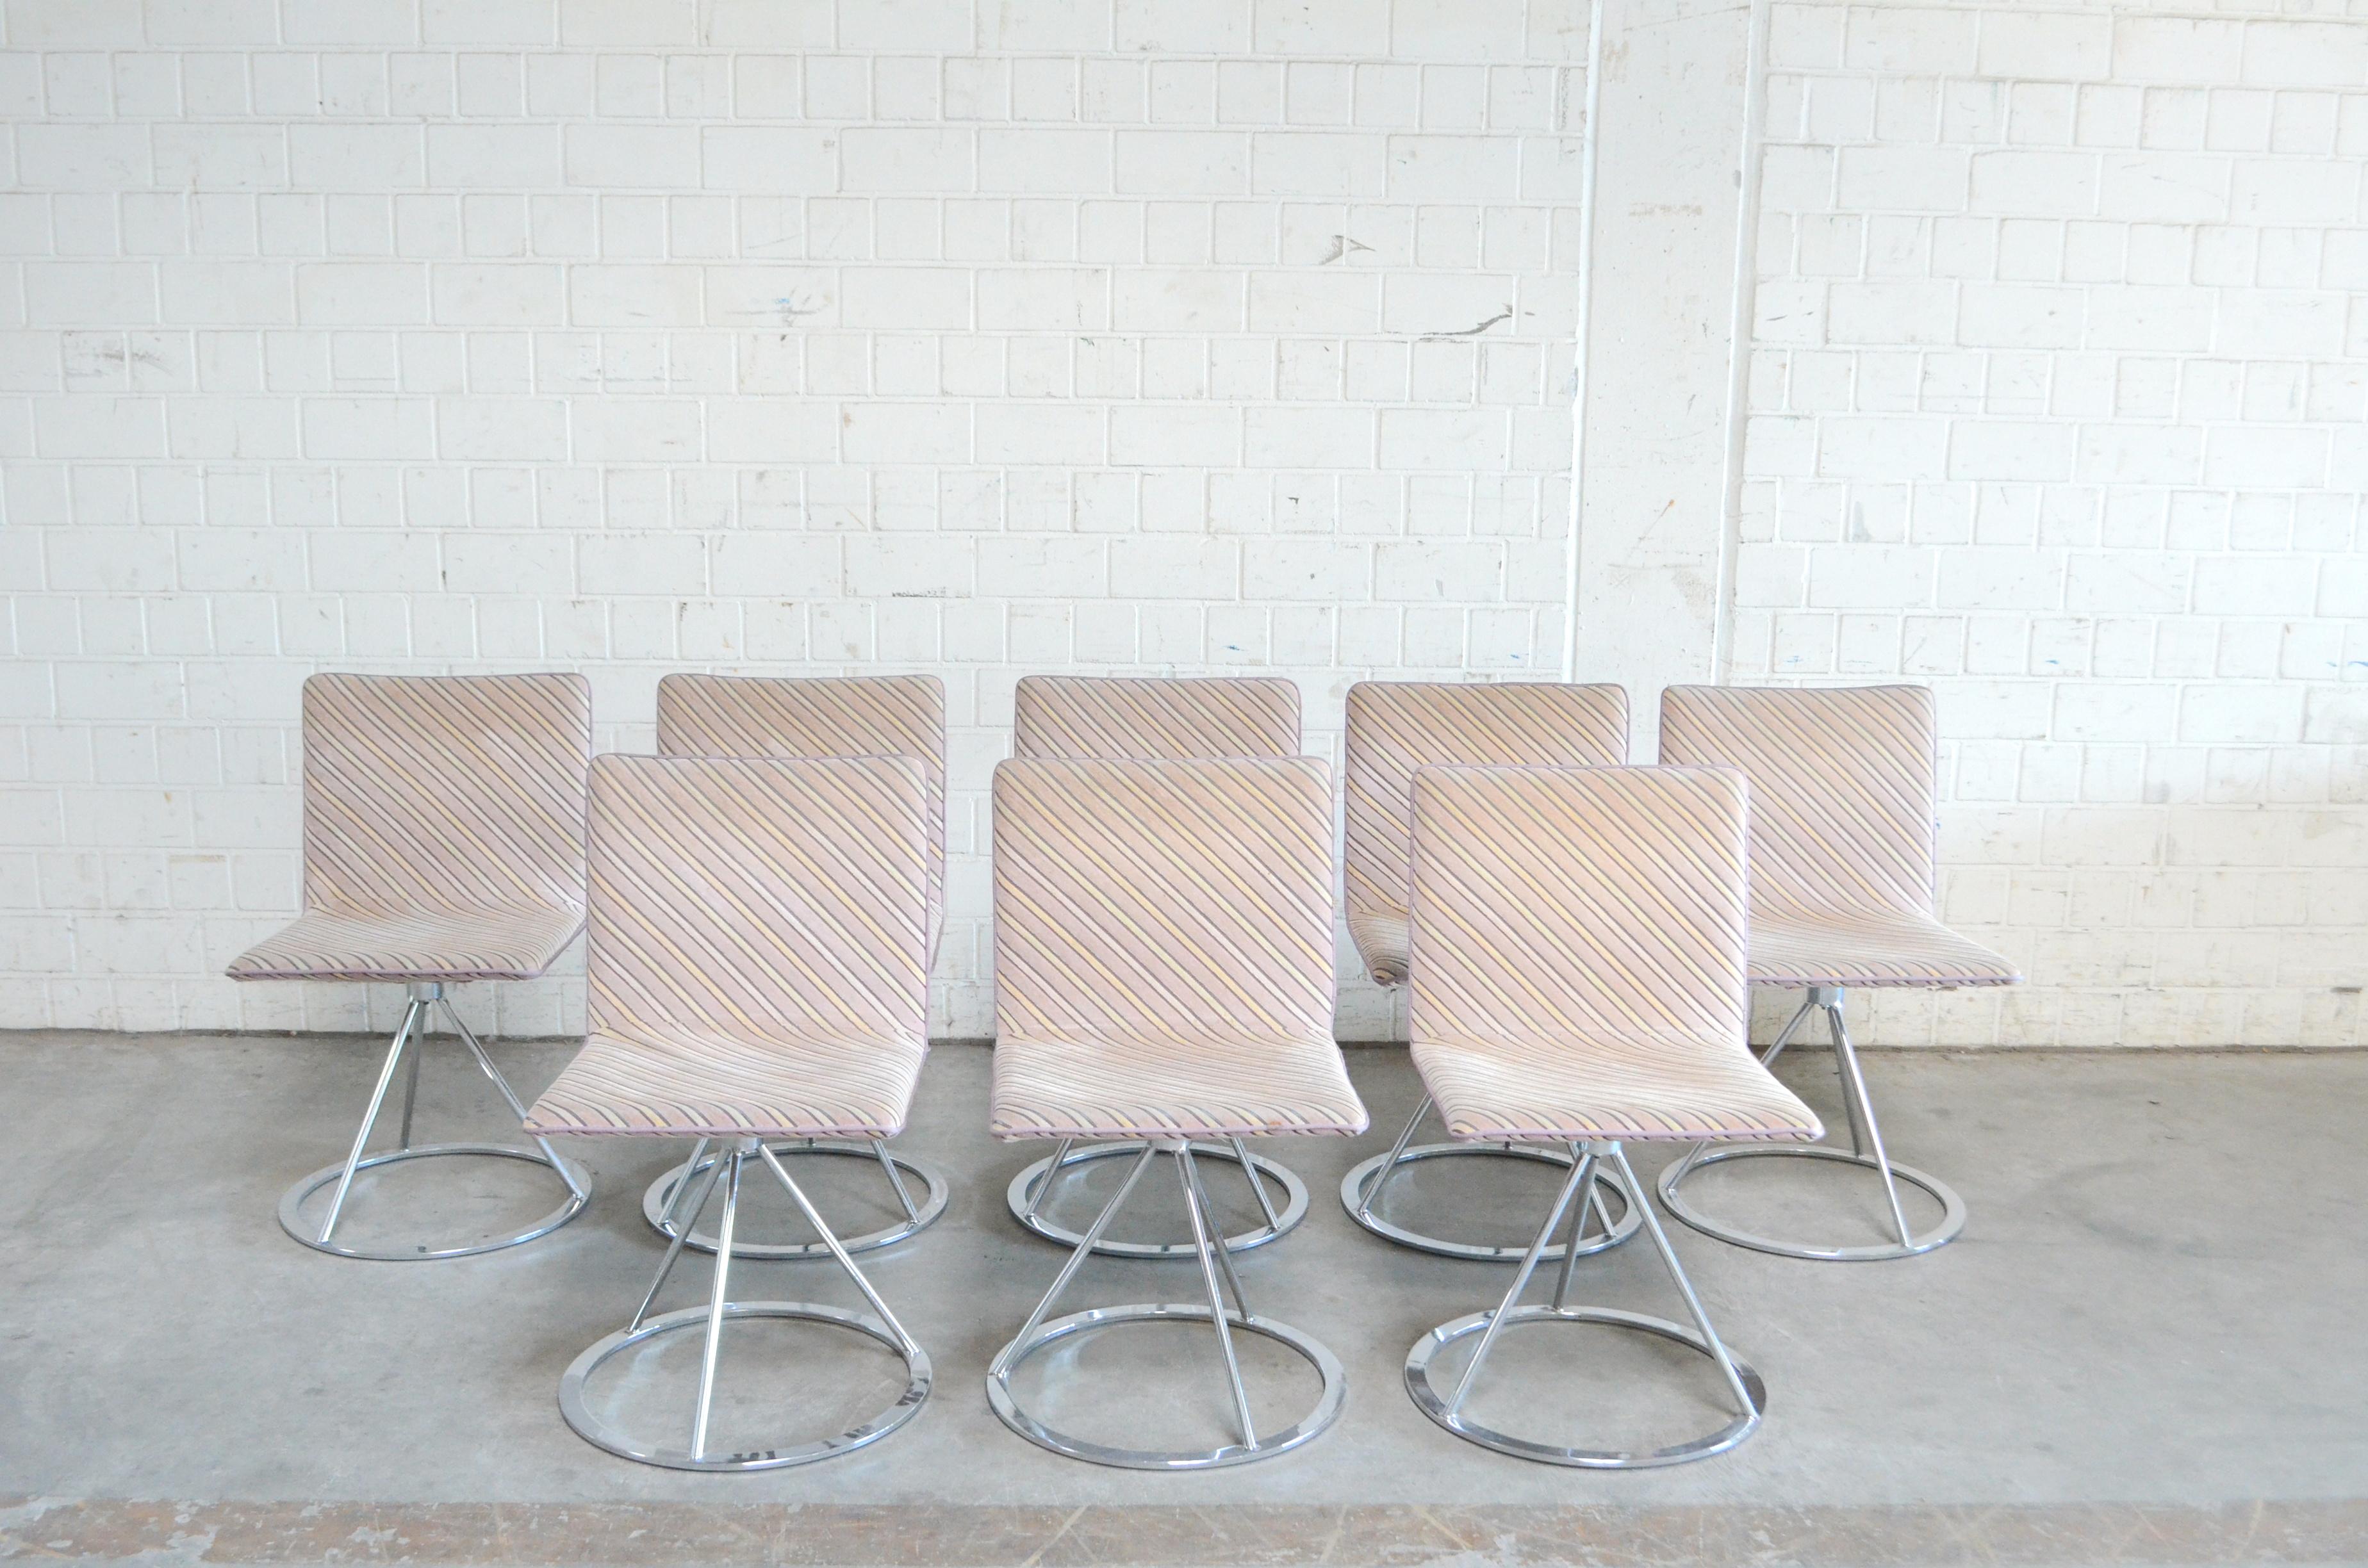 These Italian design chairs comes from the 1980s and are designed by Salvati e Tresoldi and manufactured by Saporiti Italia.
A contemporary design chair with rotating chromed steel base and upholstered seat.
The fabric is a beautiful pastel strip